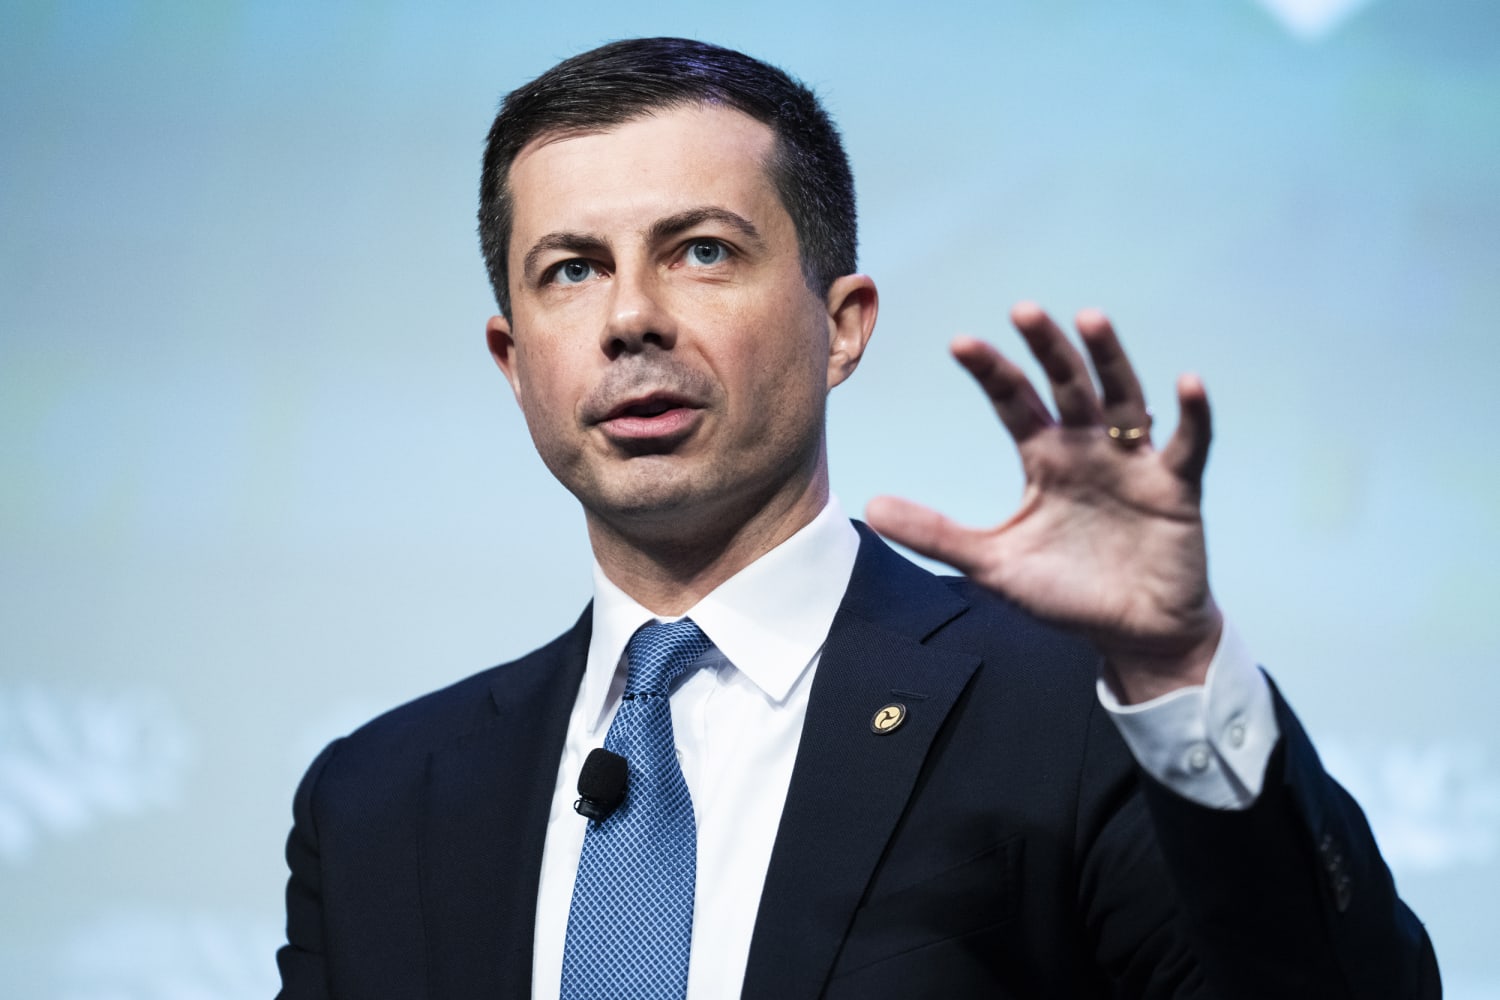 Buttigieg says the U.S. should heed 'warning signs' to avoid a 'catastrophic event' in the skies